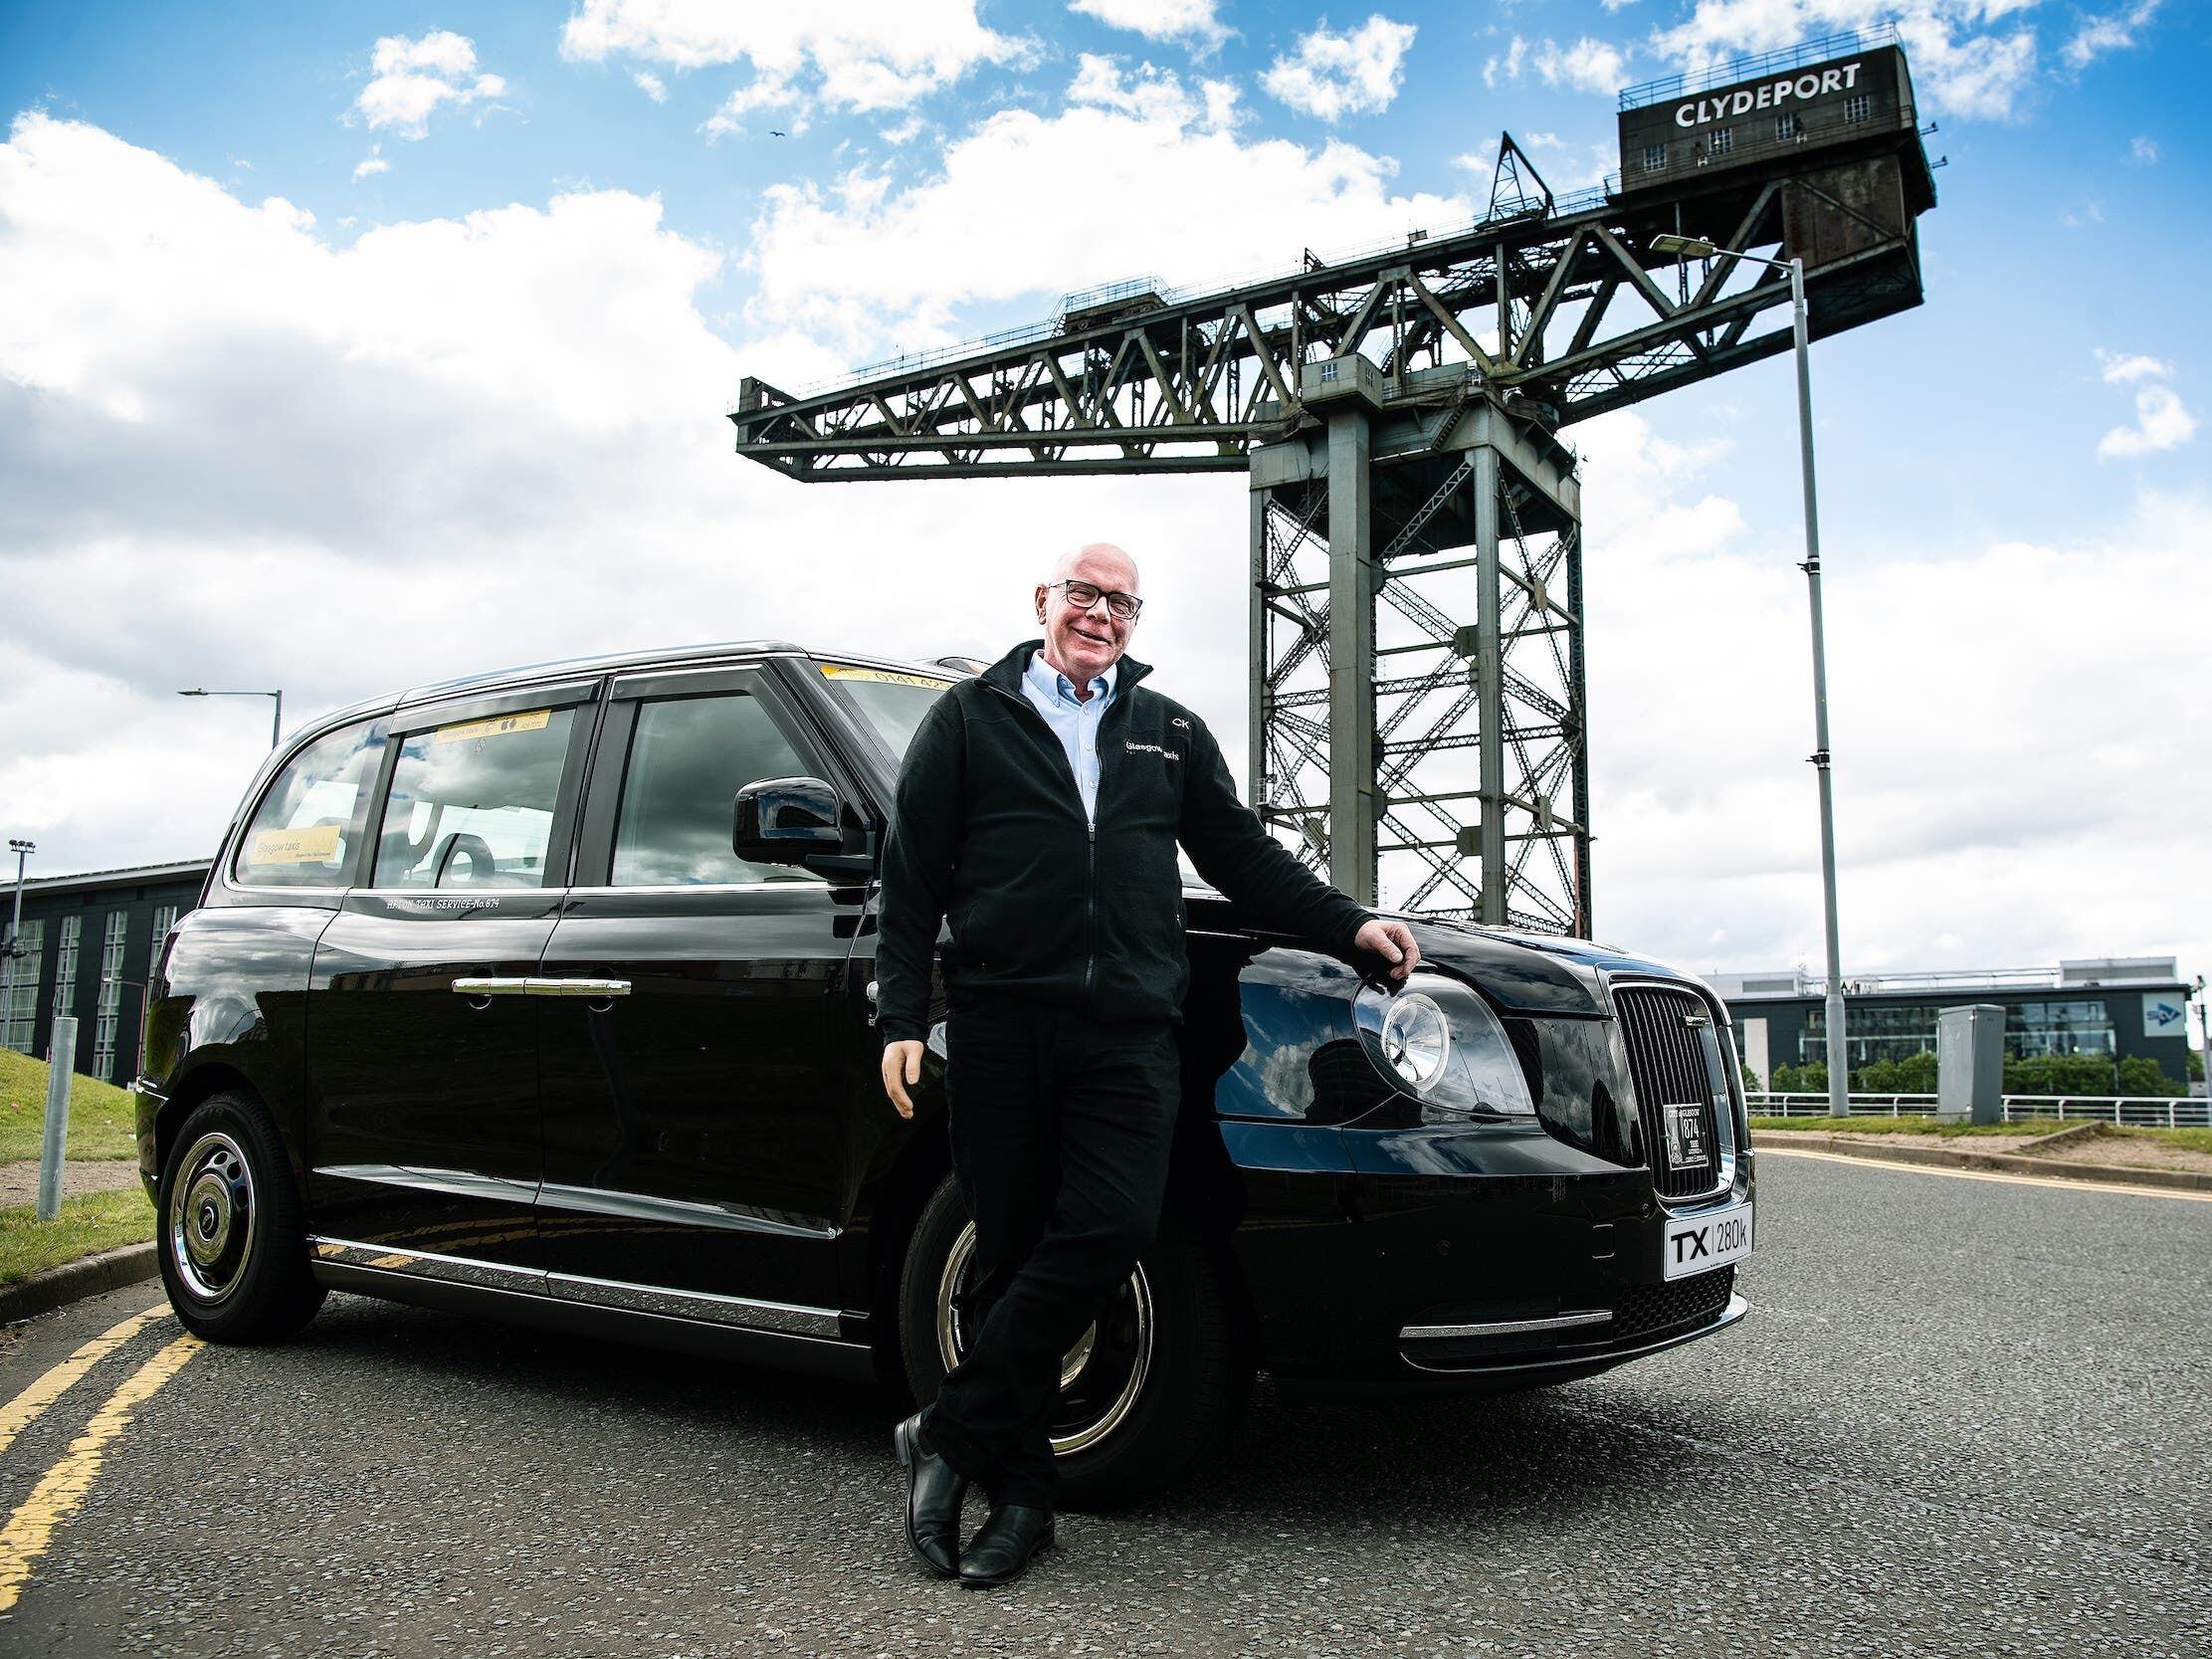 Cab driver proves robustness of LEVC electric taxi by clocking up over 280,000 miles